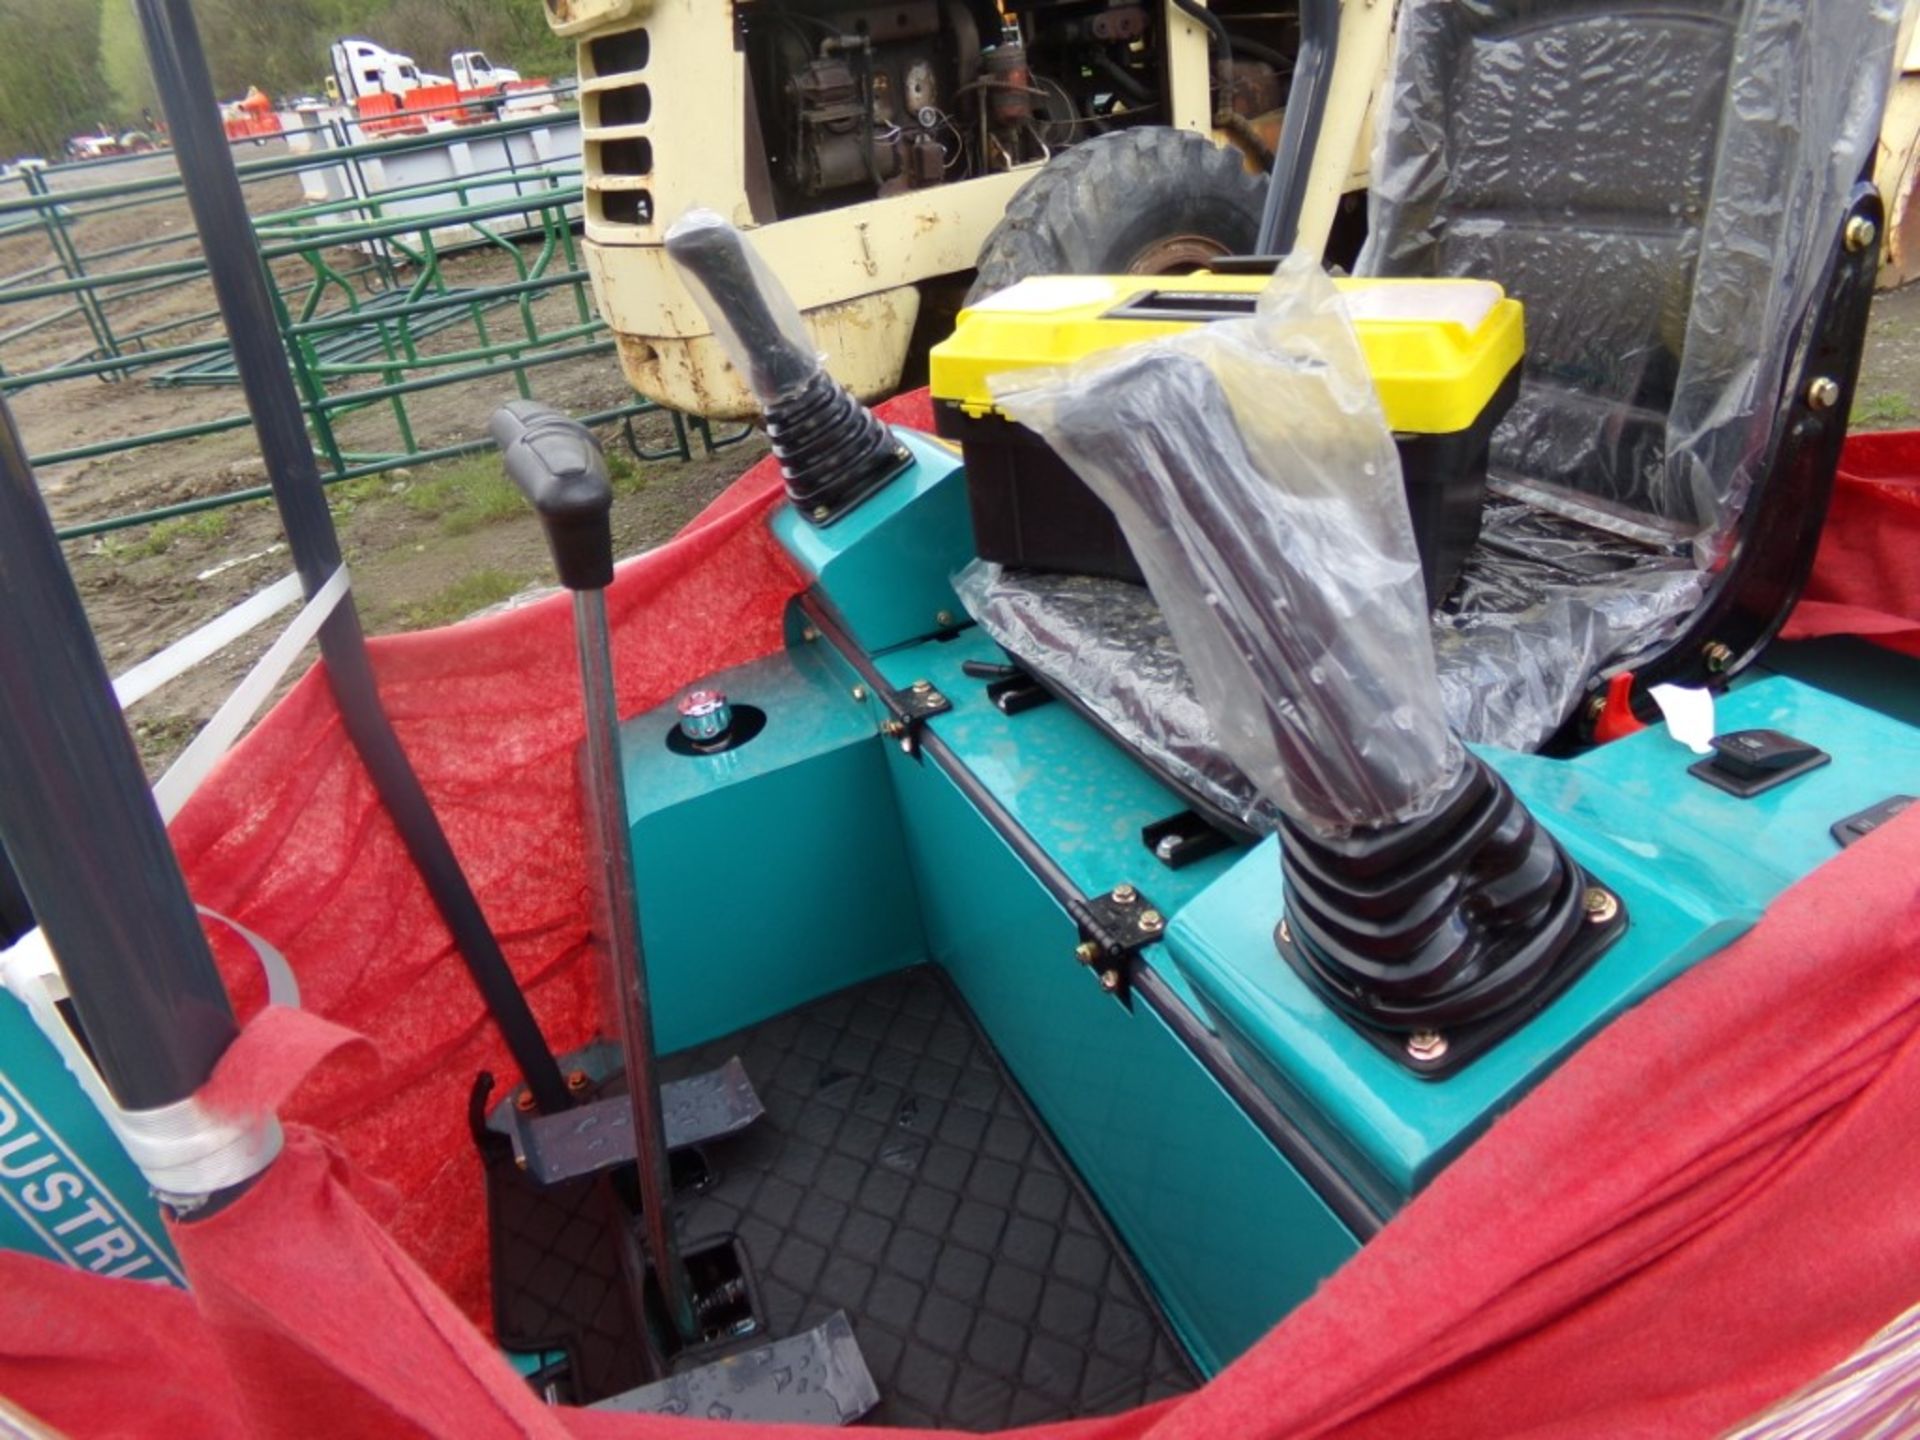 New AGT Industrial H15 Mini Excavator with Open Cab, Canopy,Green/Blue Grader Blade, Stationary - Image 6 of 6